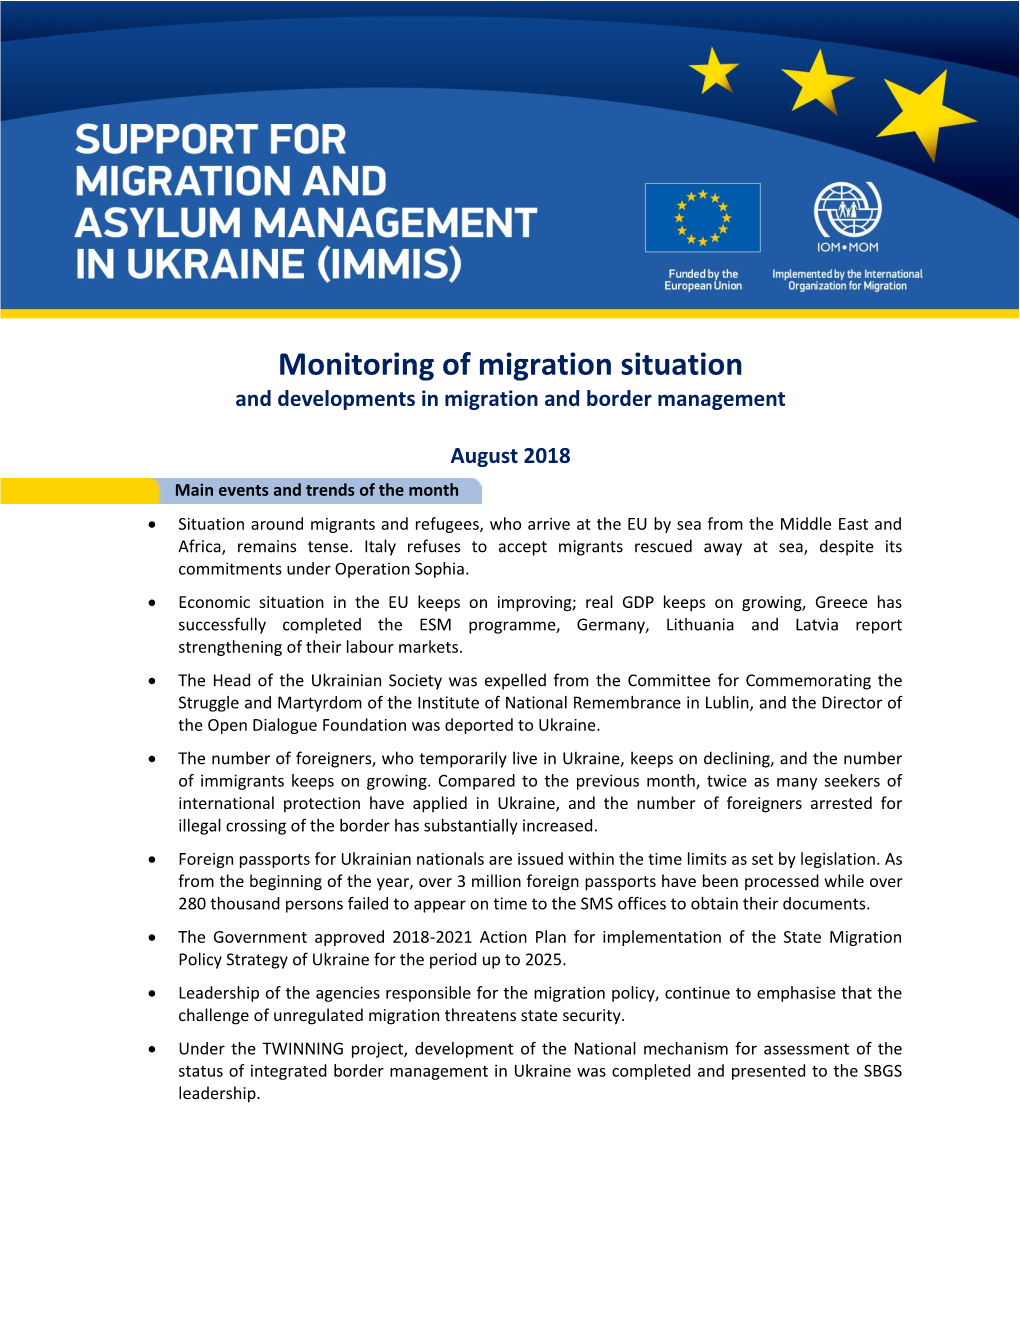 Monitoring of Migration Situation and Developments in Migration and Border Management